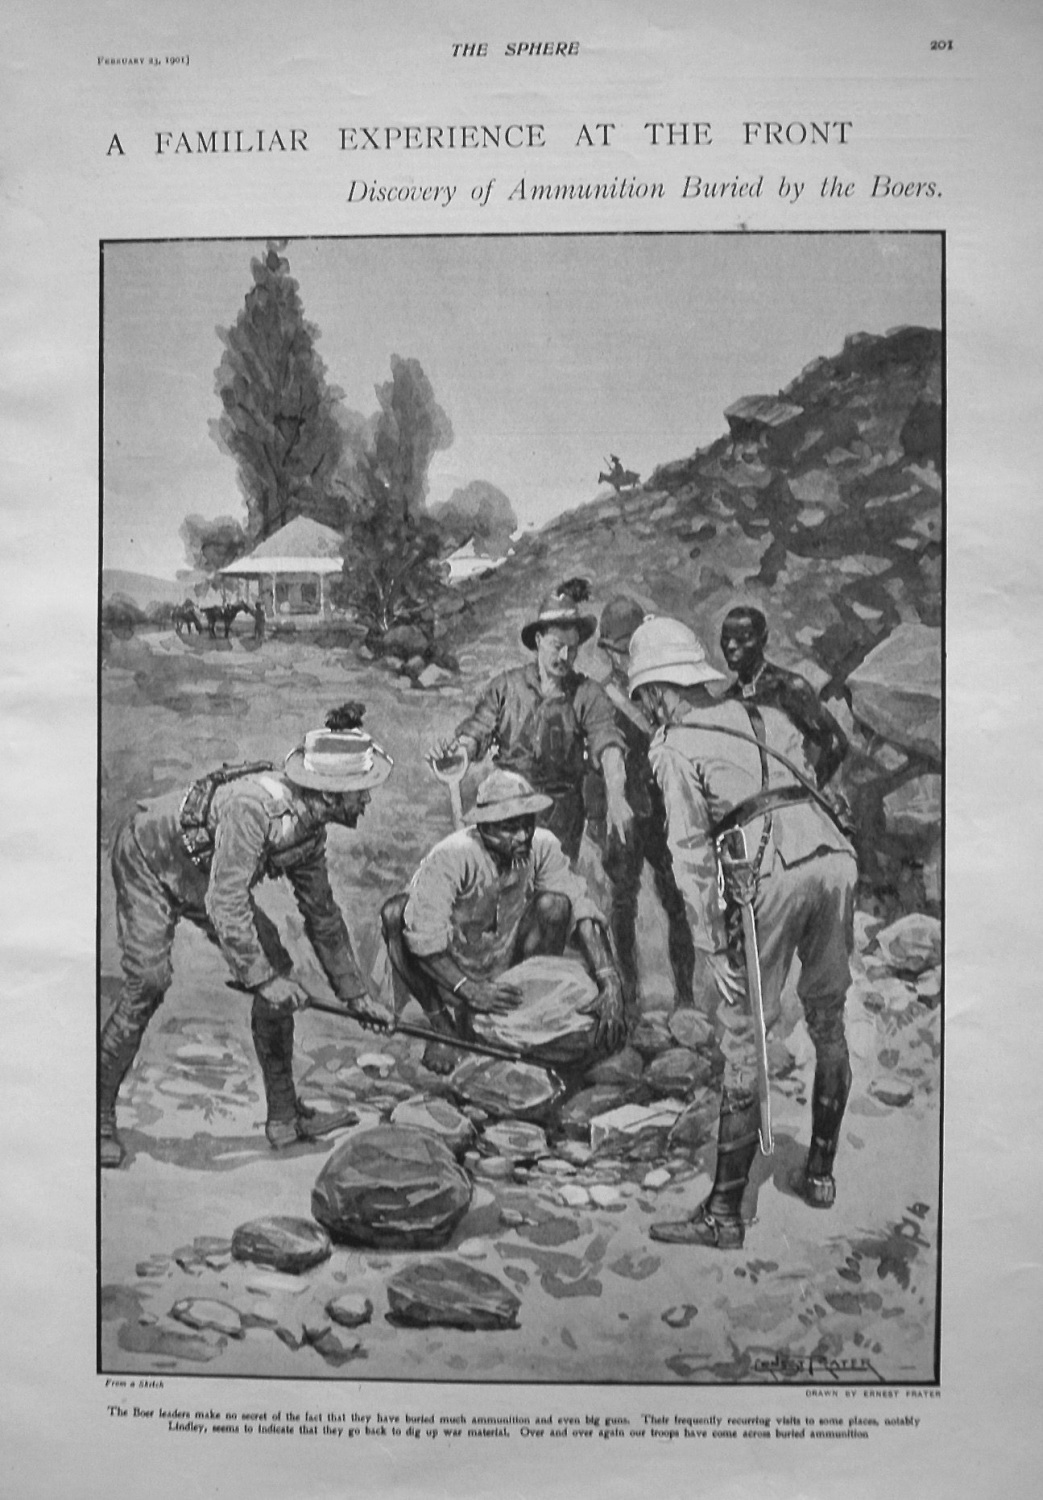 Familiar Experience at the Front - Discovery of Ammunition Buried by the Bo